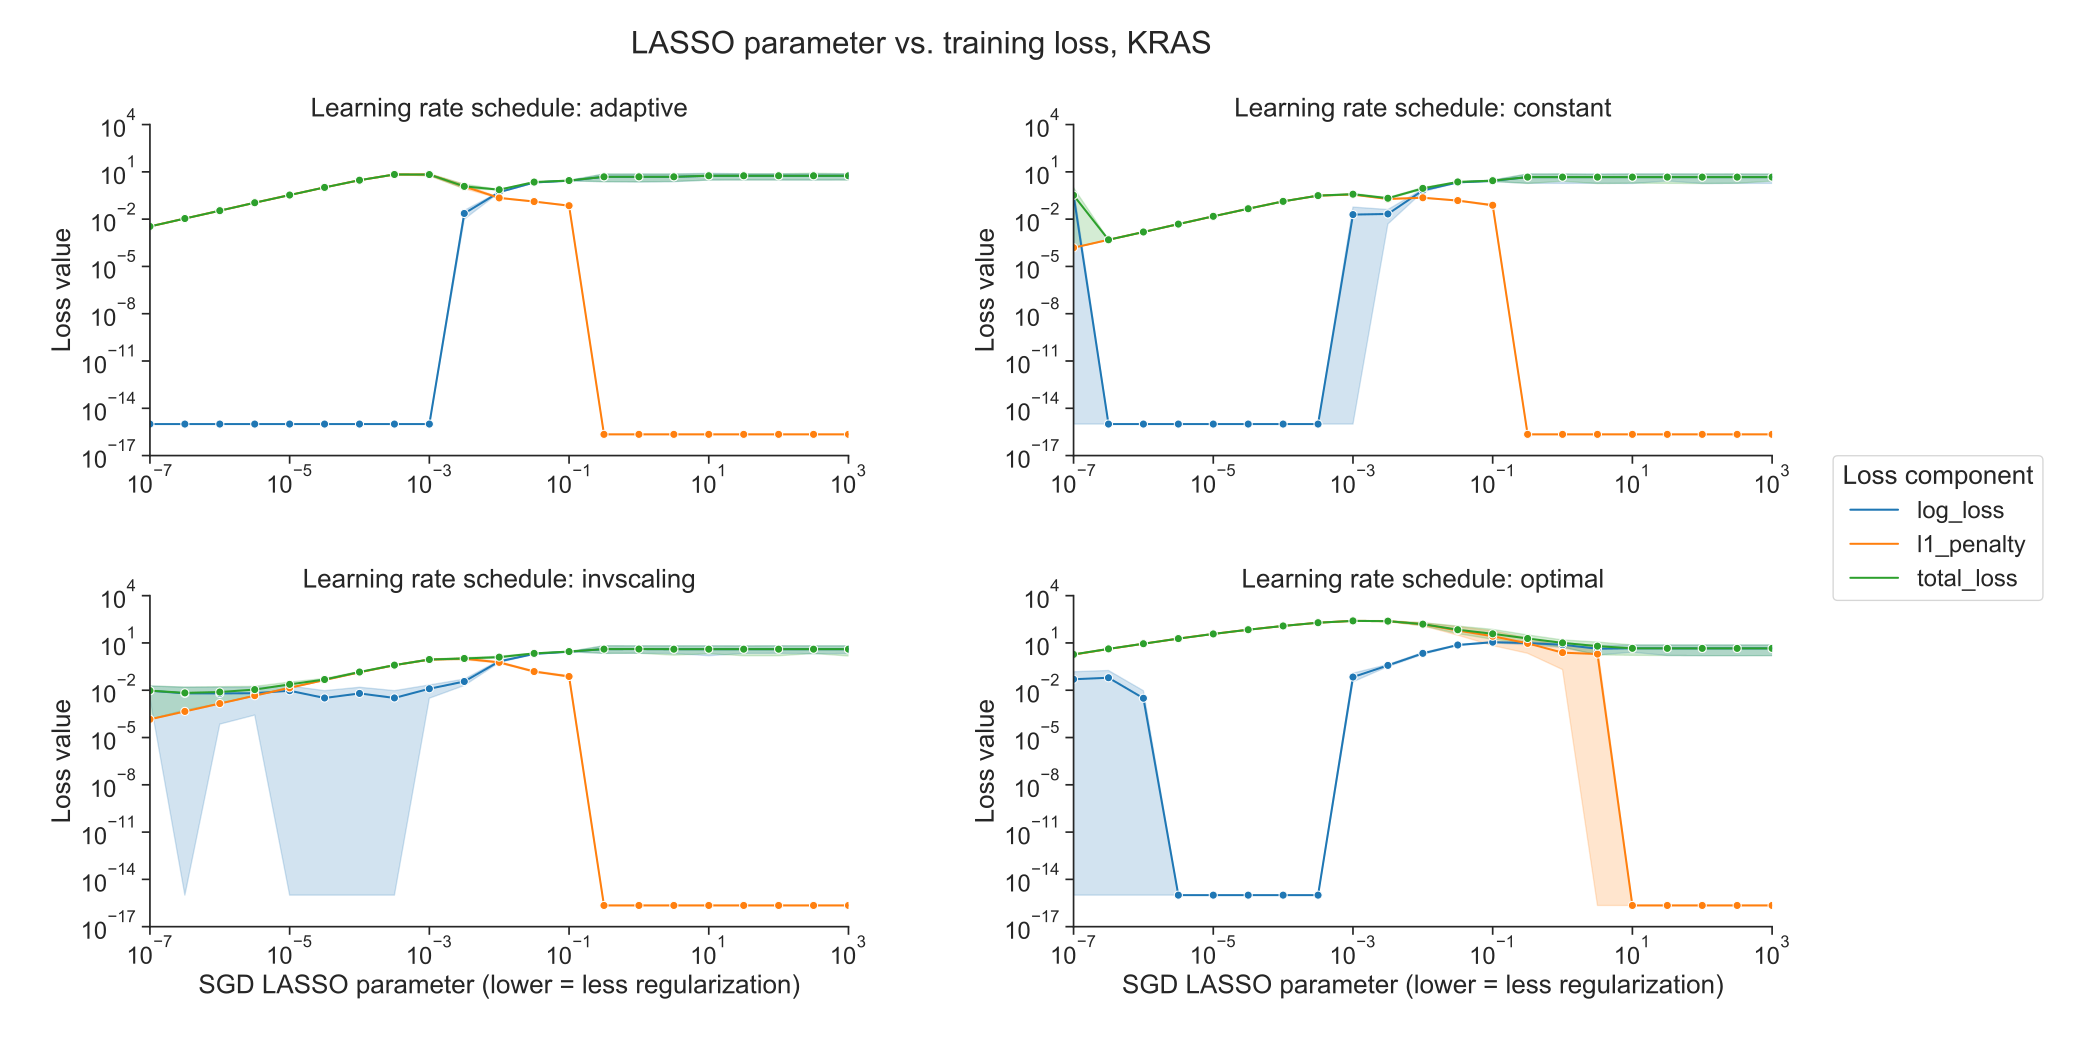 Figure S4: Decomposition of loss function into data loss and L1 penalty components for KRAS mutation prediction using SGD optimizer, across regularization levels, using varying learning rate schedulers. 0 values on the y-axis are rounded up to machine epsilon, i.e. 2.22 x 10-16.